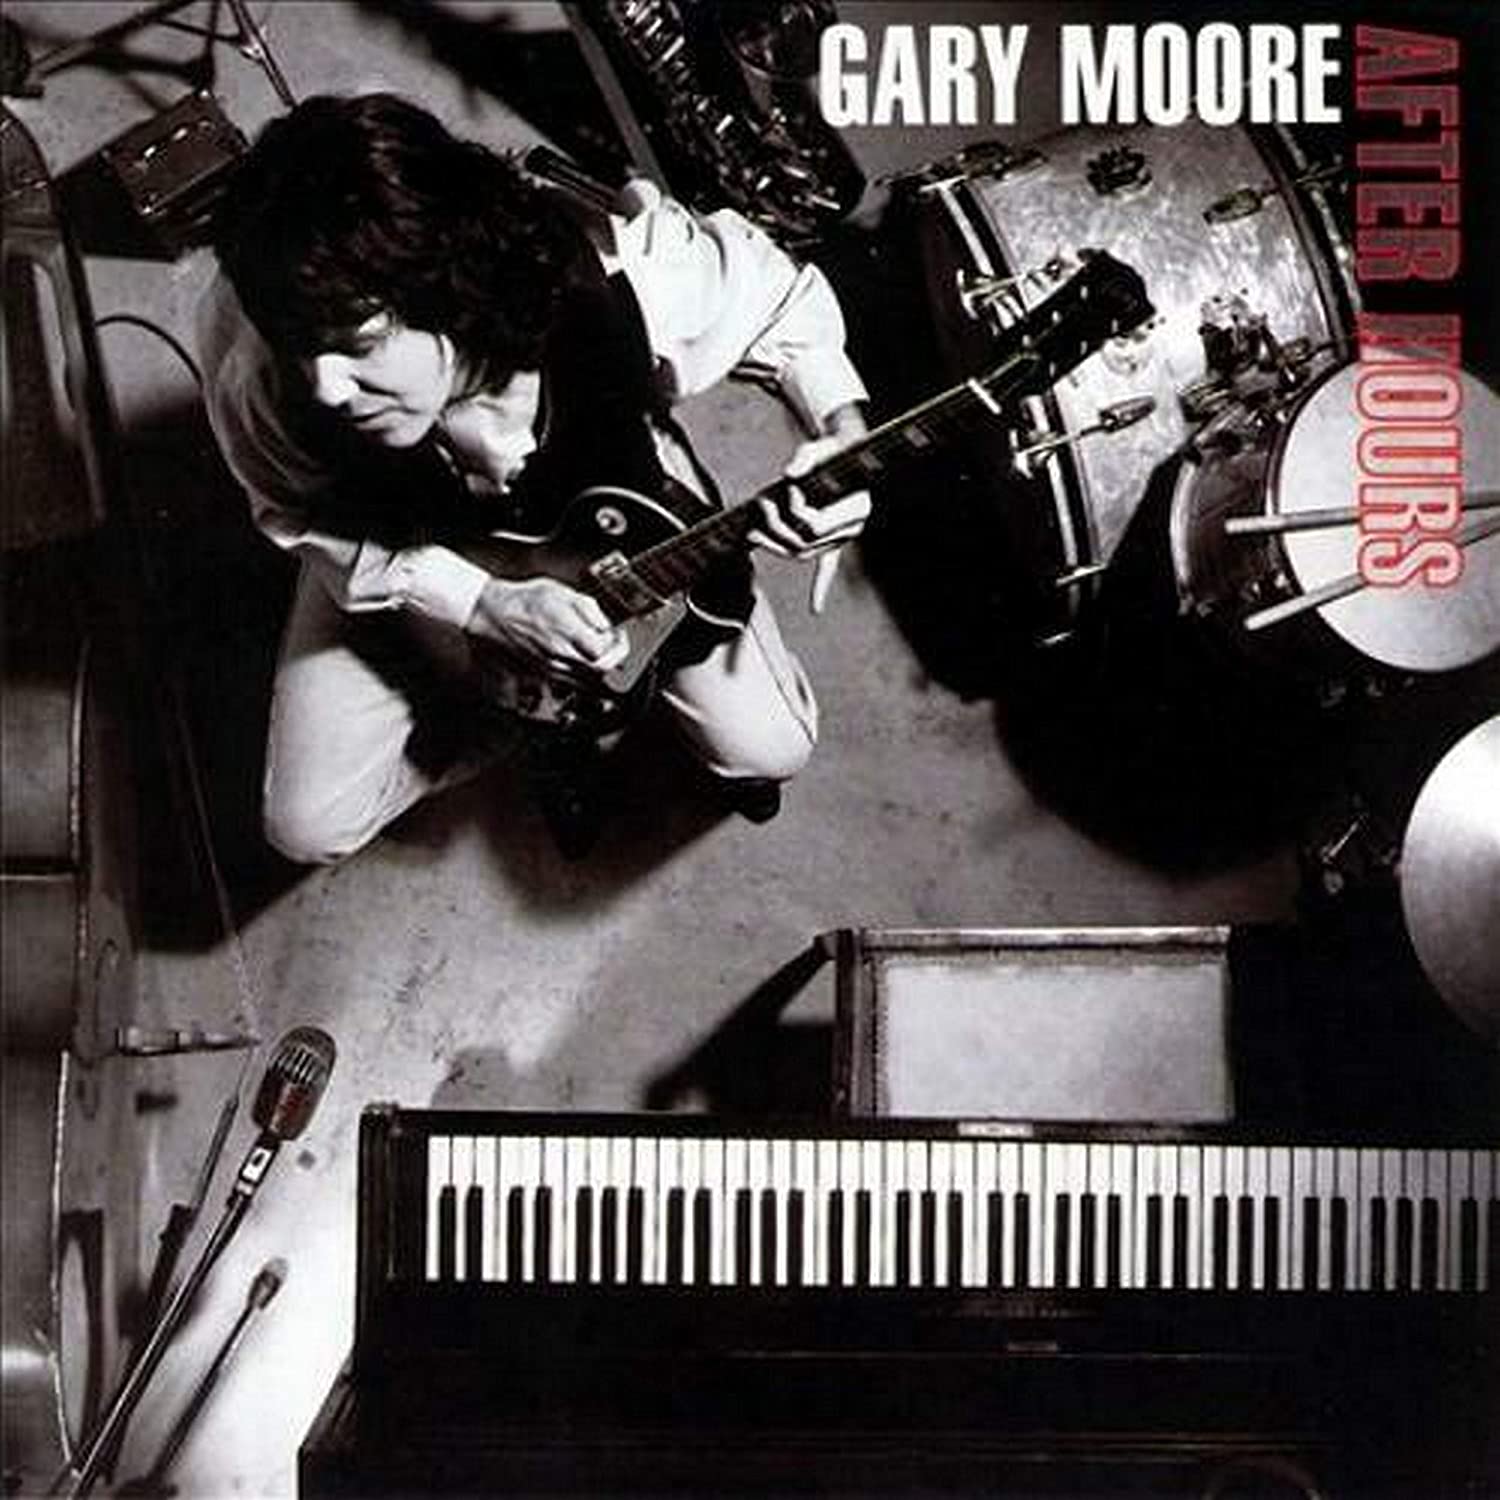 Gary Moore - After Hours 